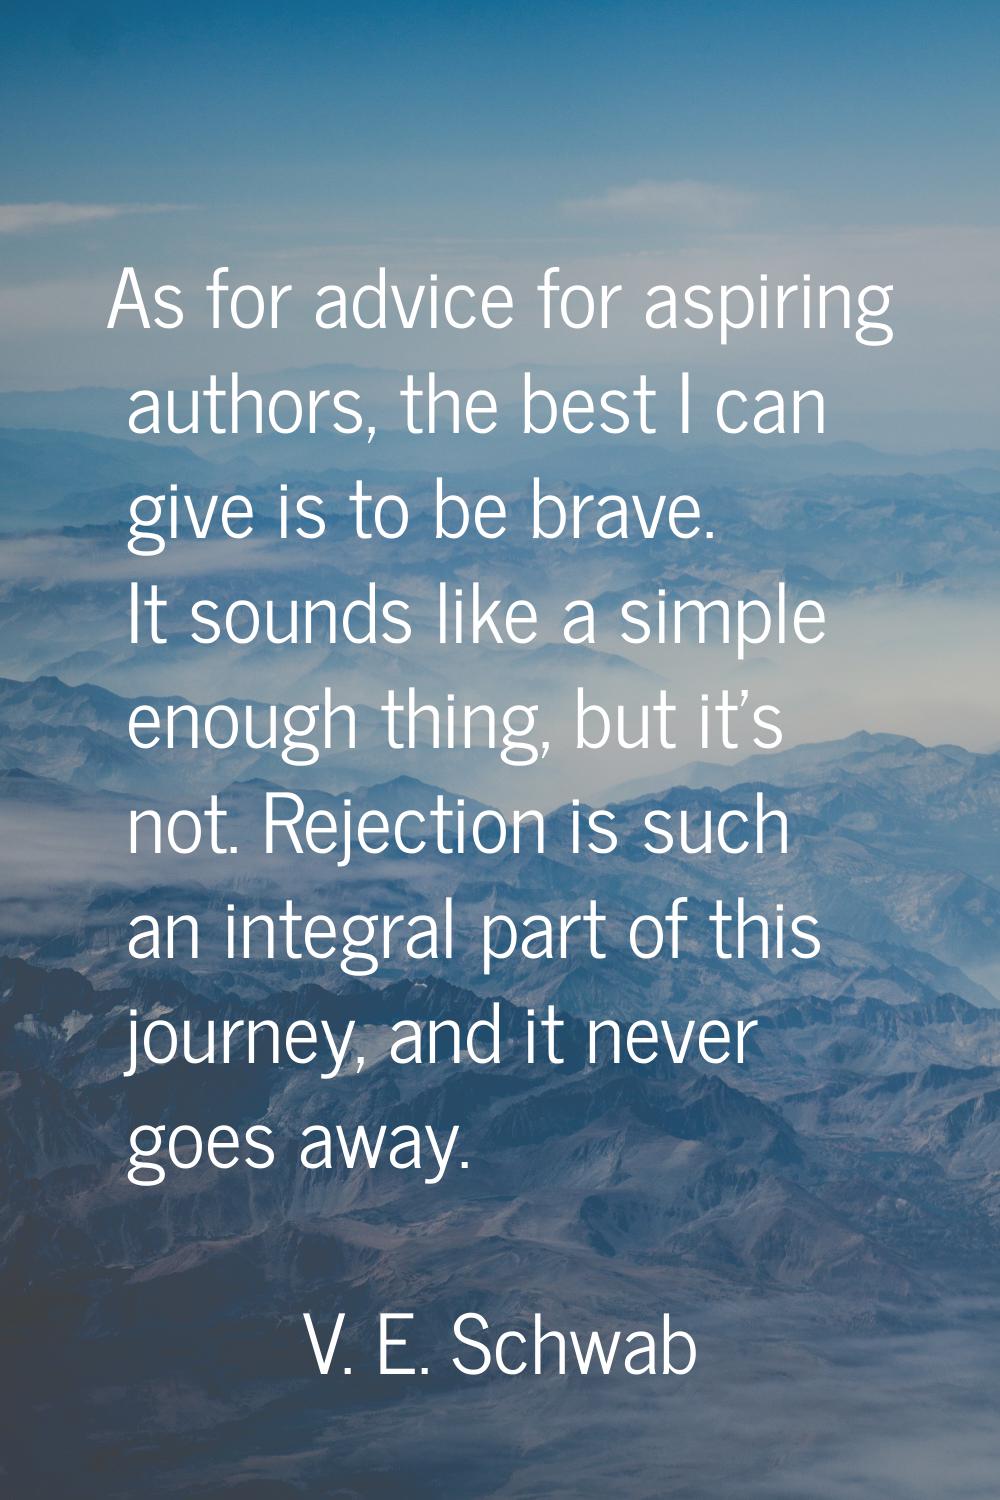 As for advice for aspiring authors, the best I can give is to be brave. It sounds like a simple eno